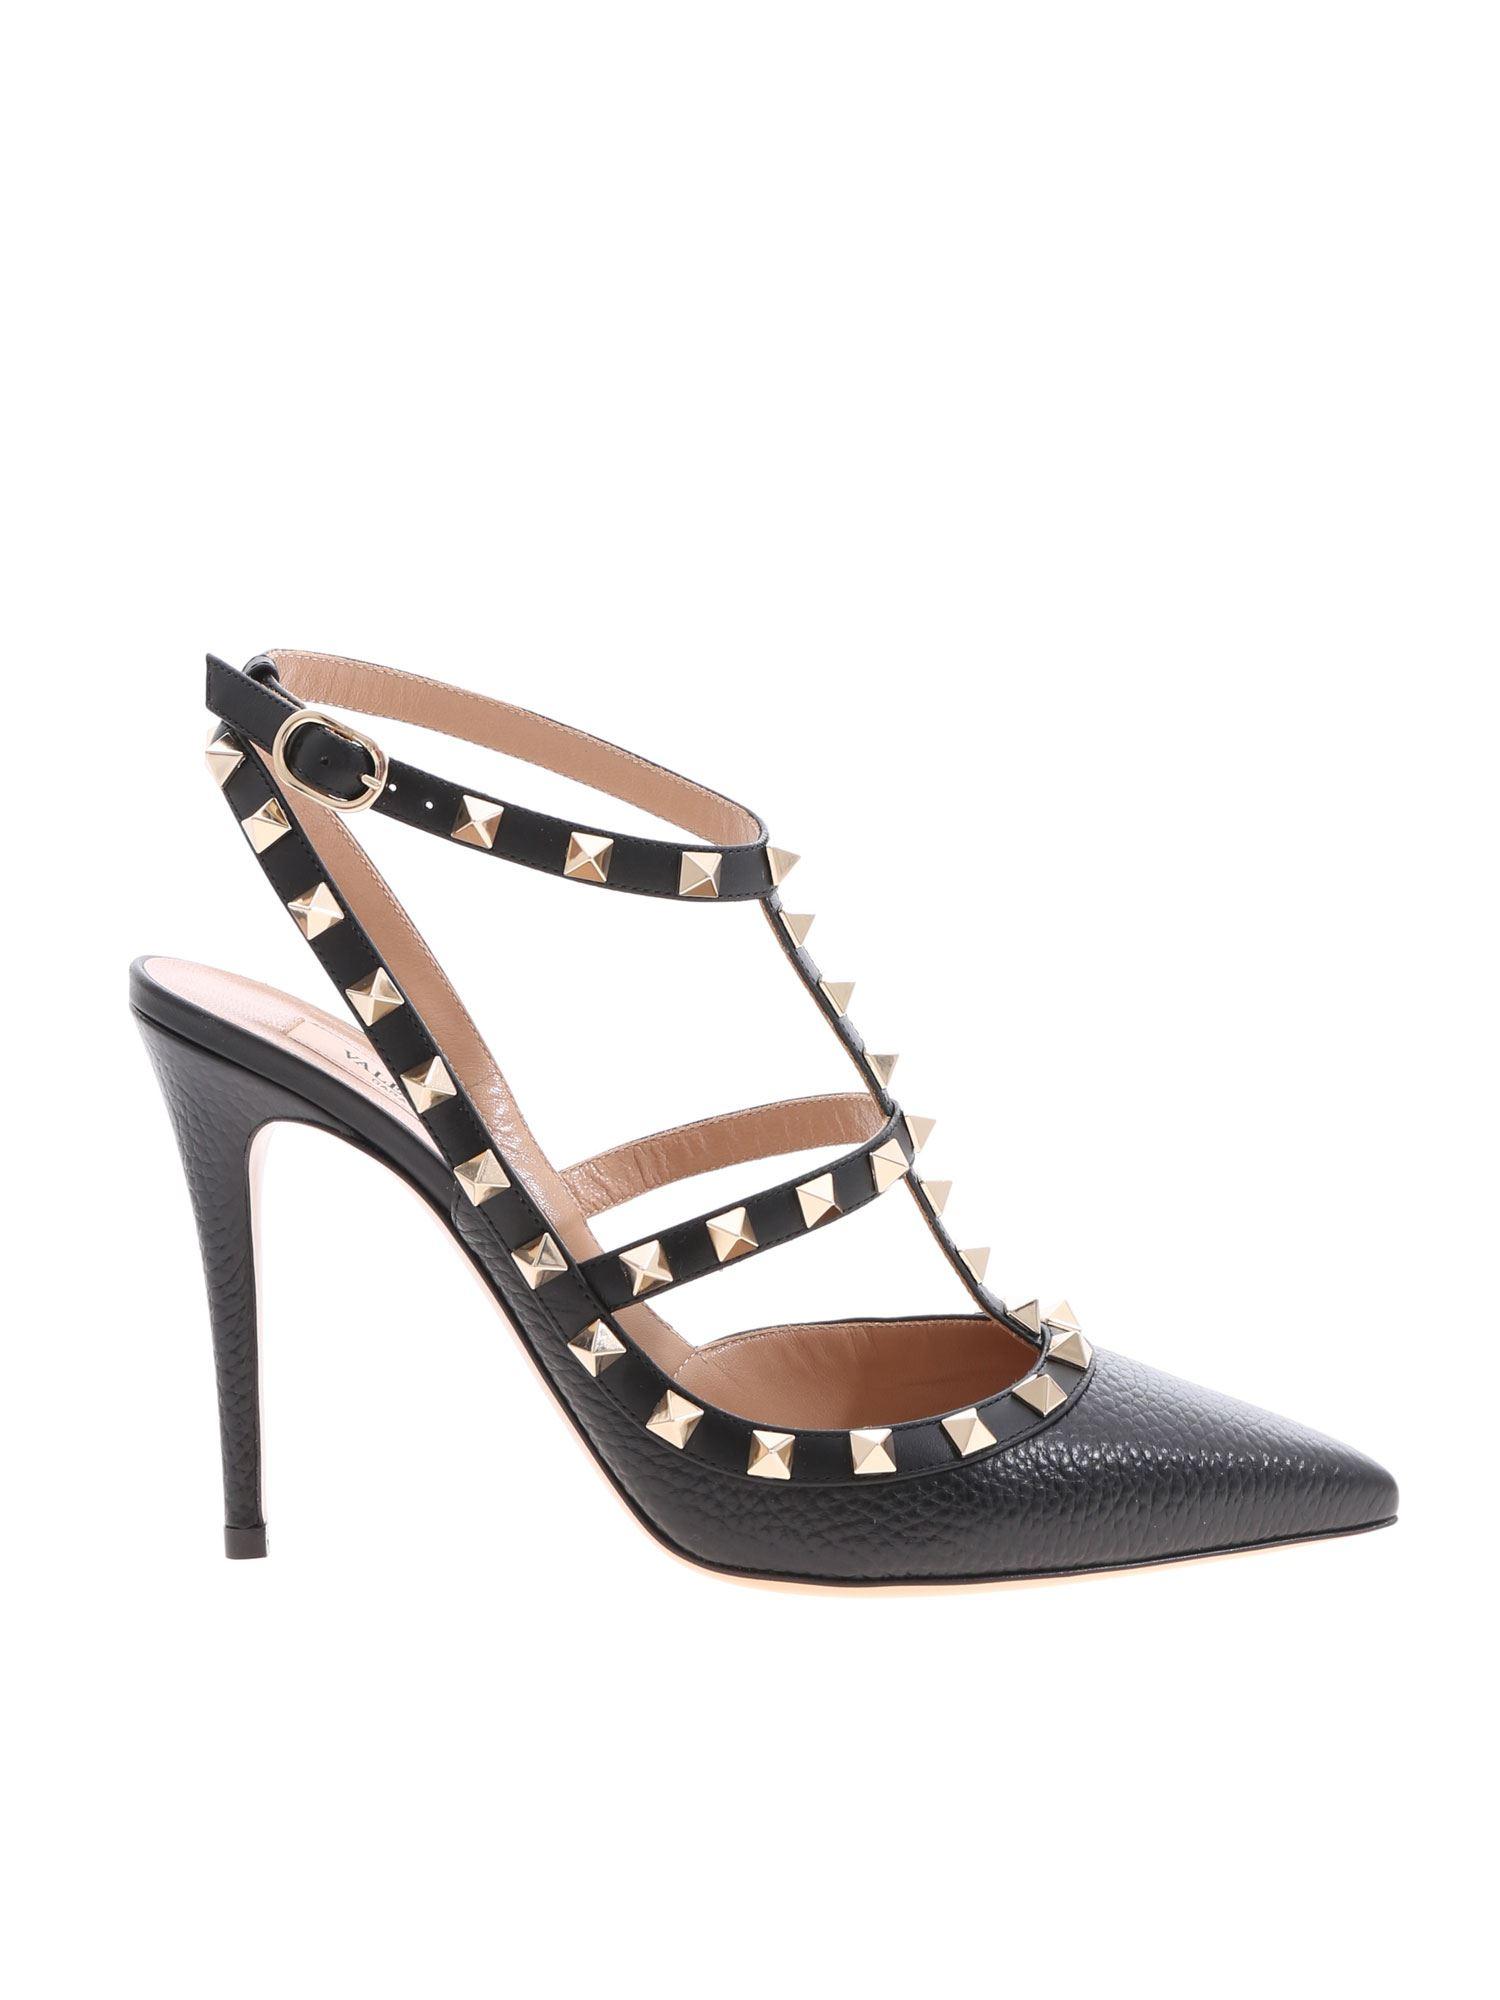 Rockstud Pumps In Black With Gold Studs 